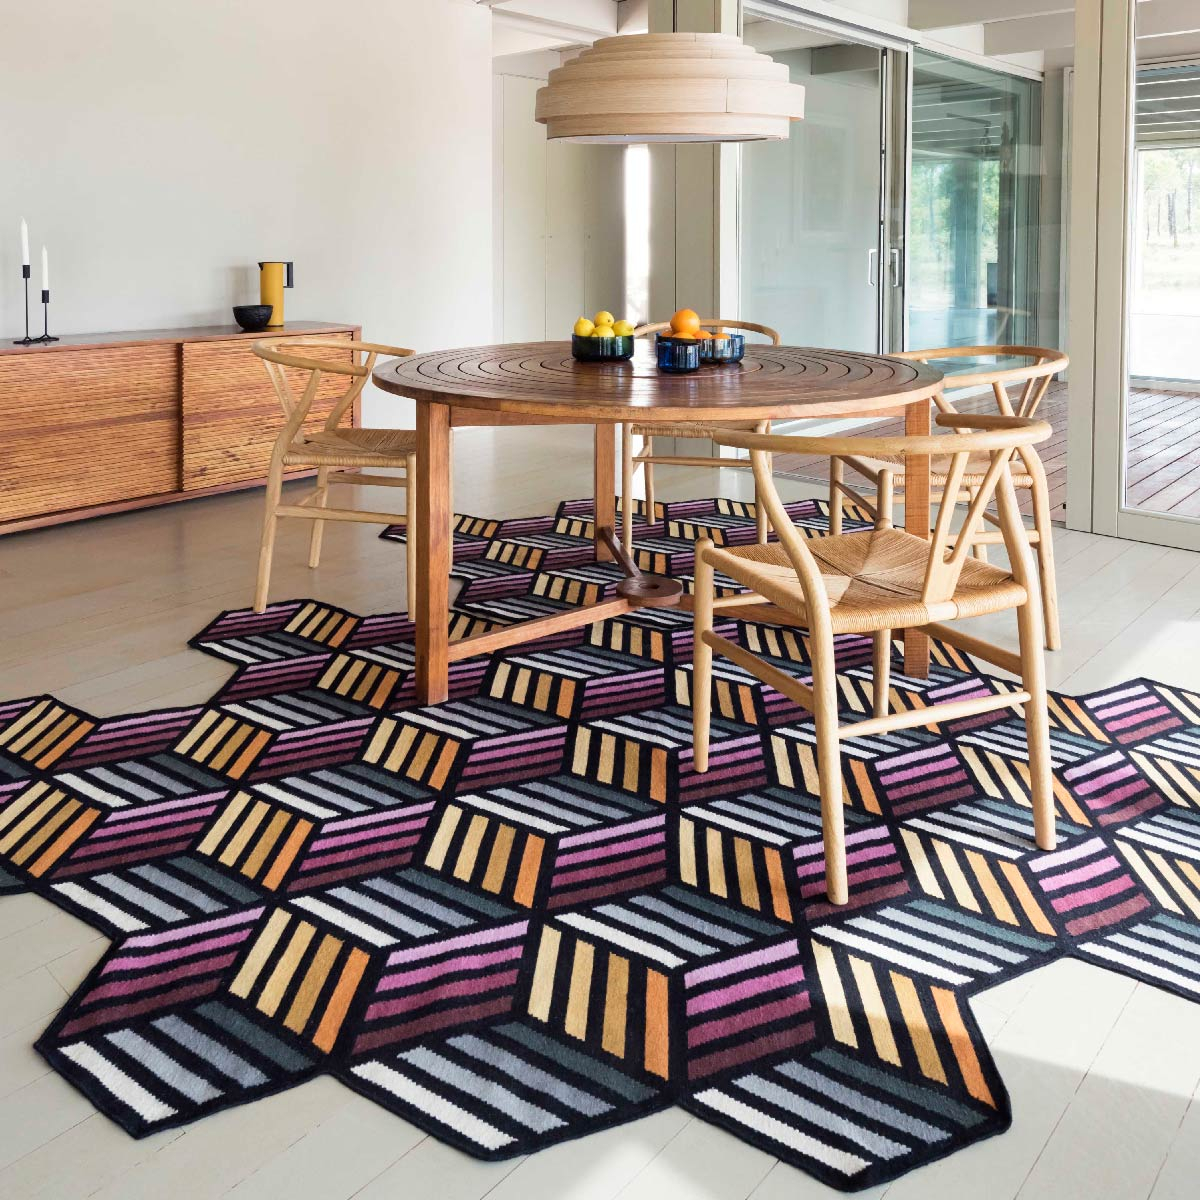 Hicks' Hexagon officially licensed luxury rugs and runners